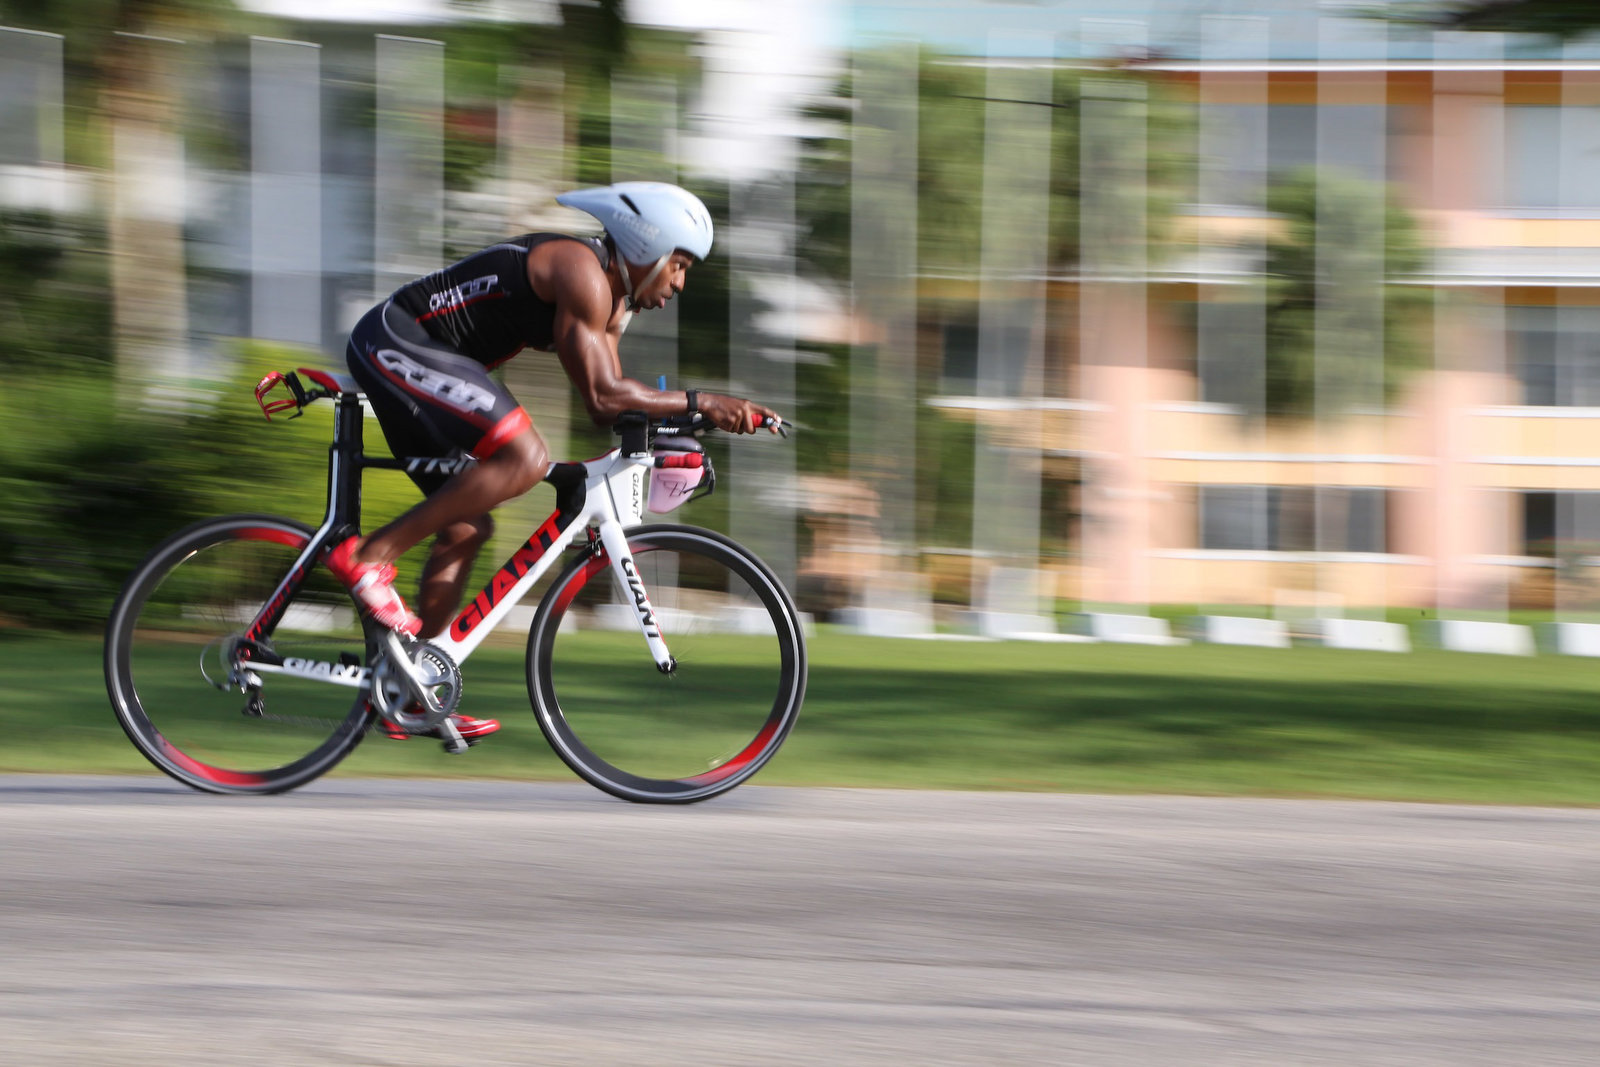 Cyclist in action. Photo by Ross Photography, Trinidad, W.I..